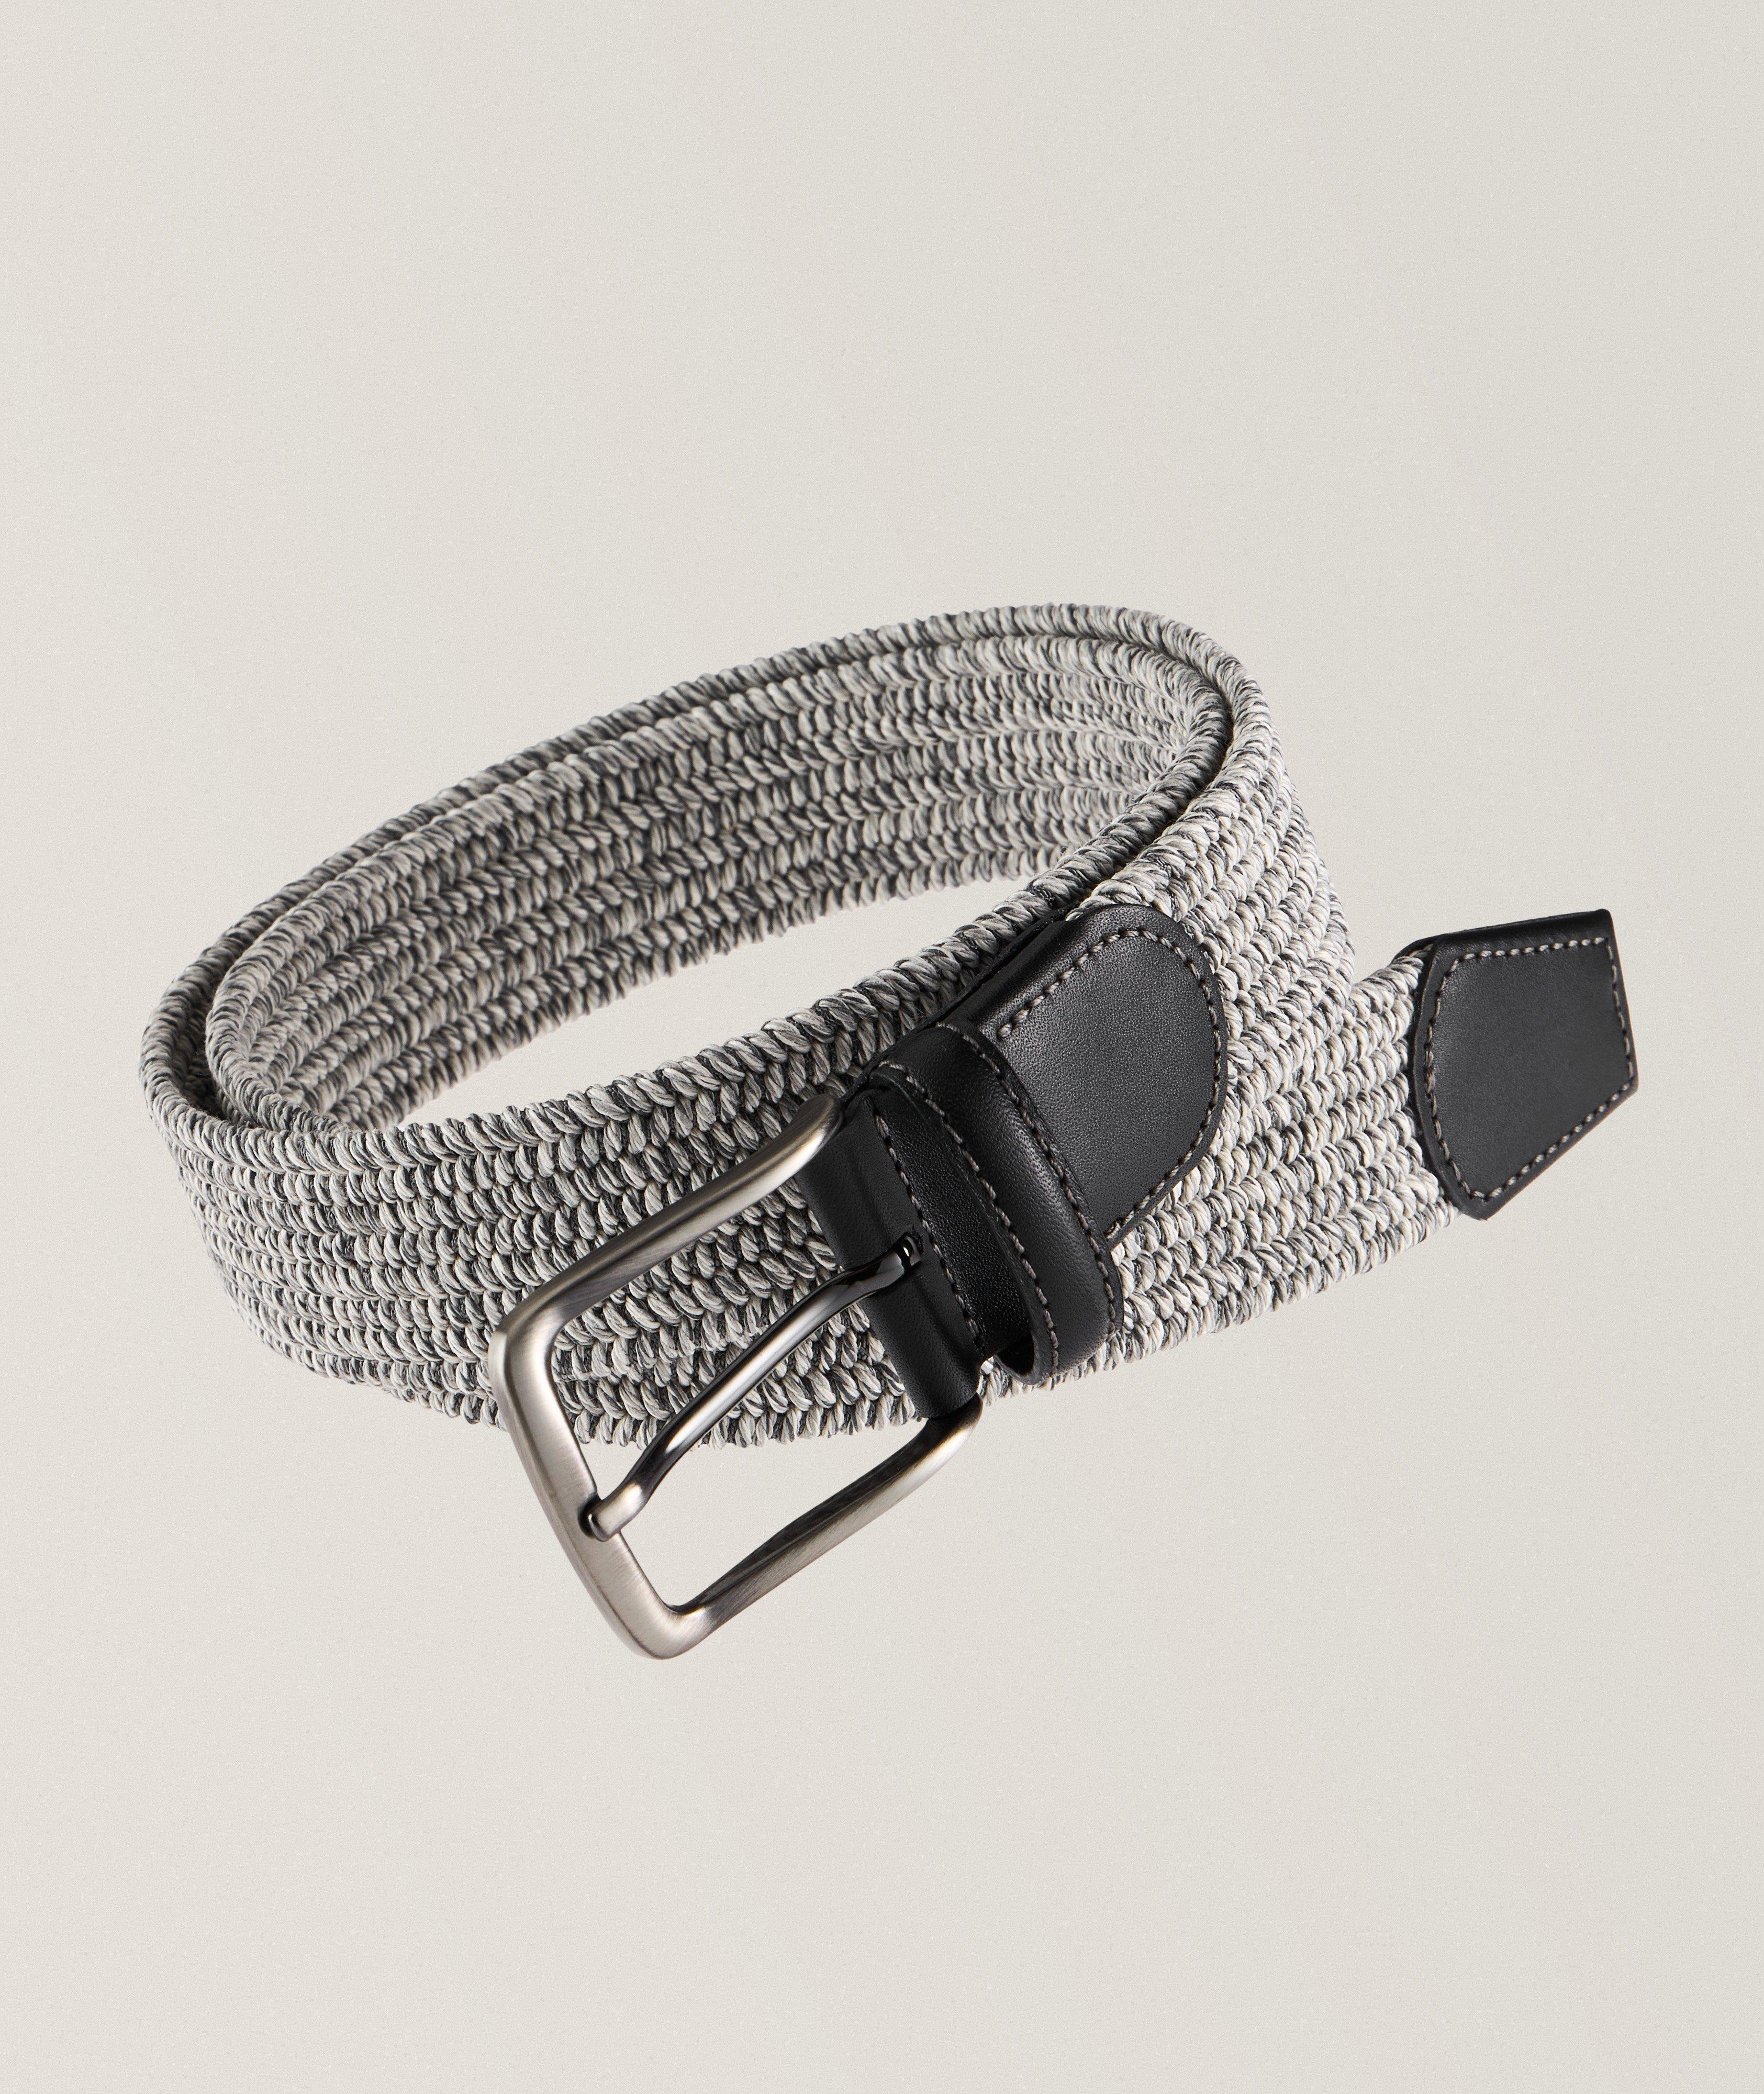 Mélange Technical-Stretch Woven Pin-Buckle Belt image 0